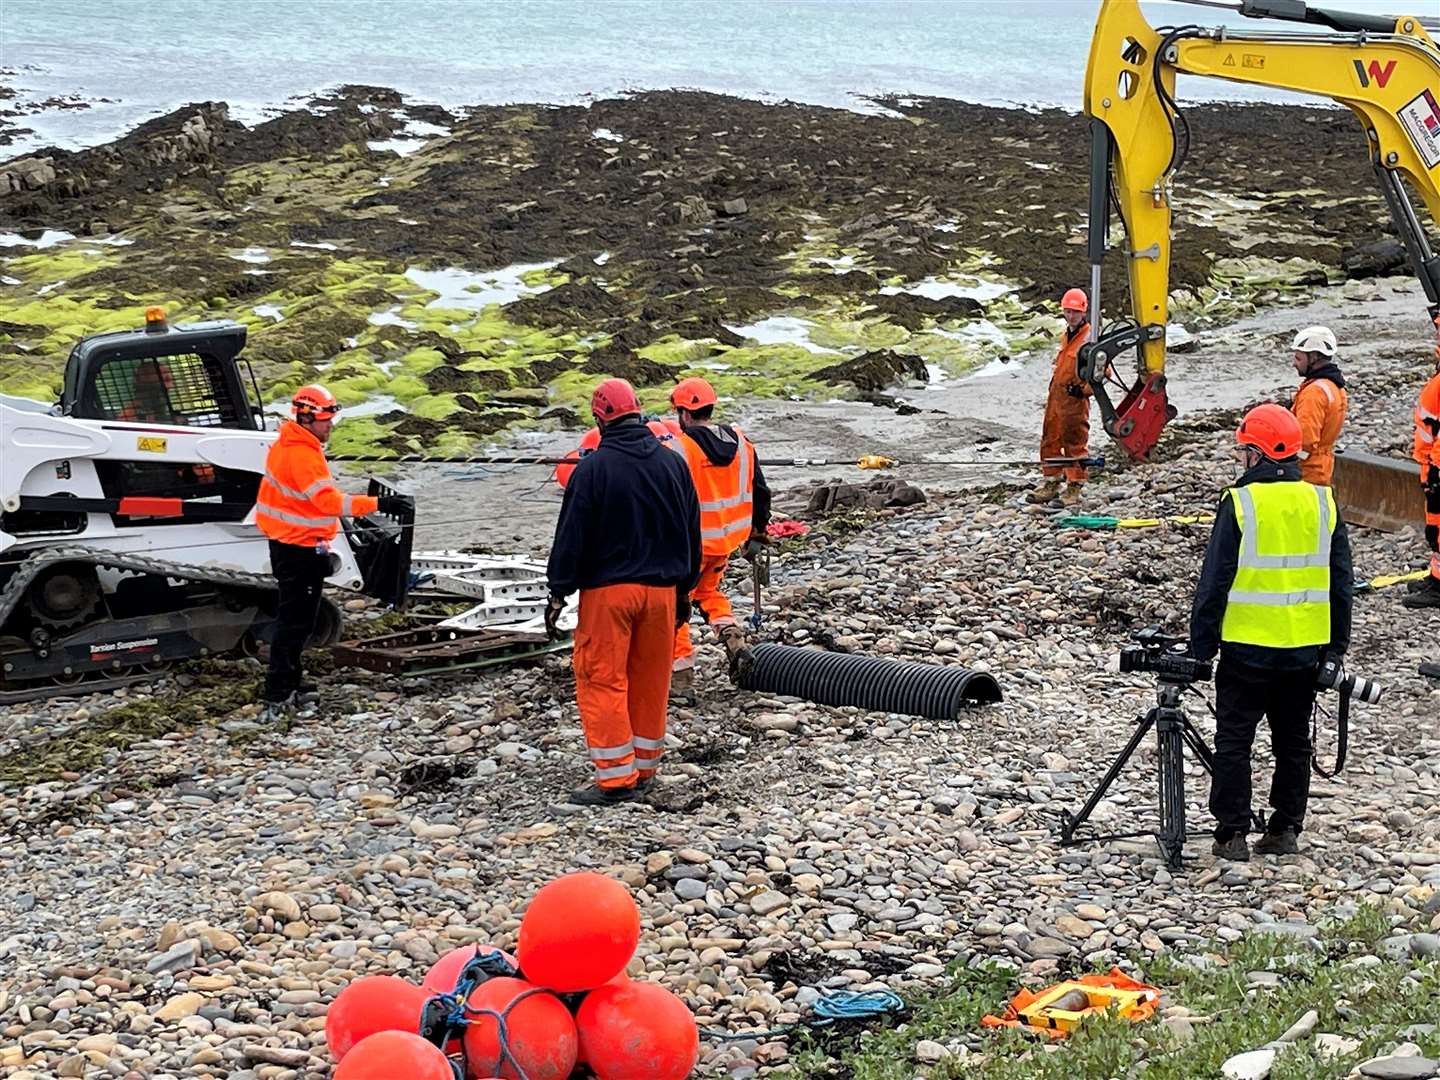 A similar cable to the one damaged last week, shown being laid down at Stronsay, Orkney.